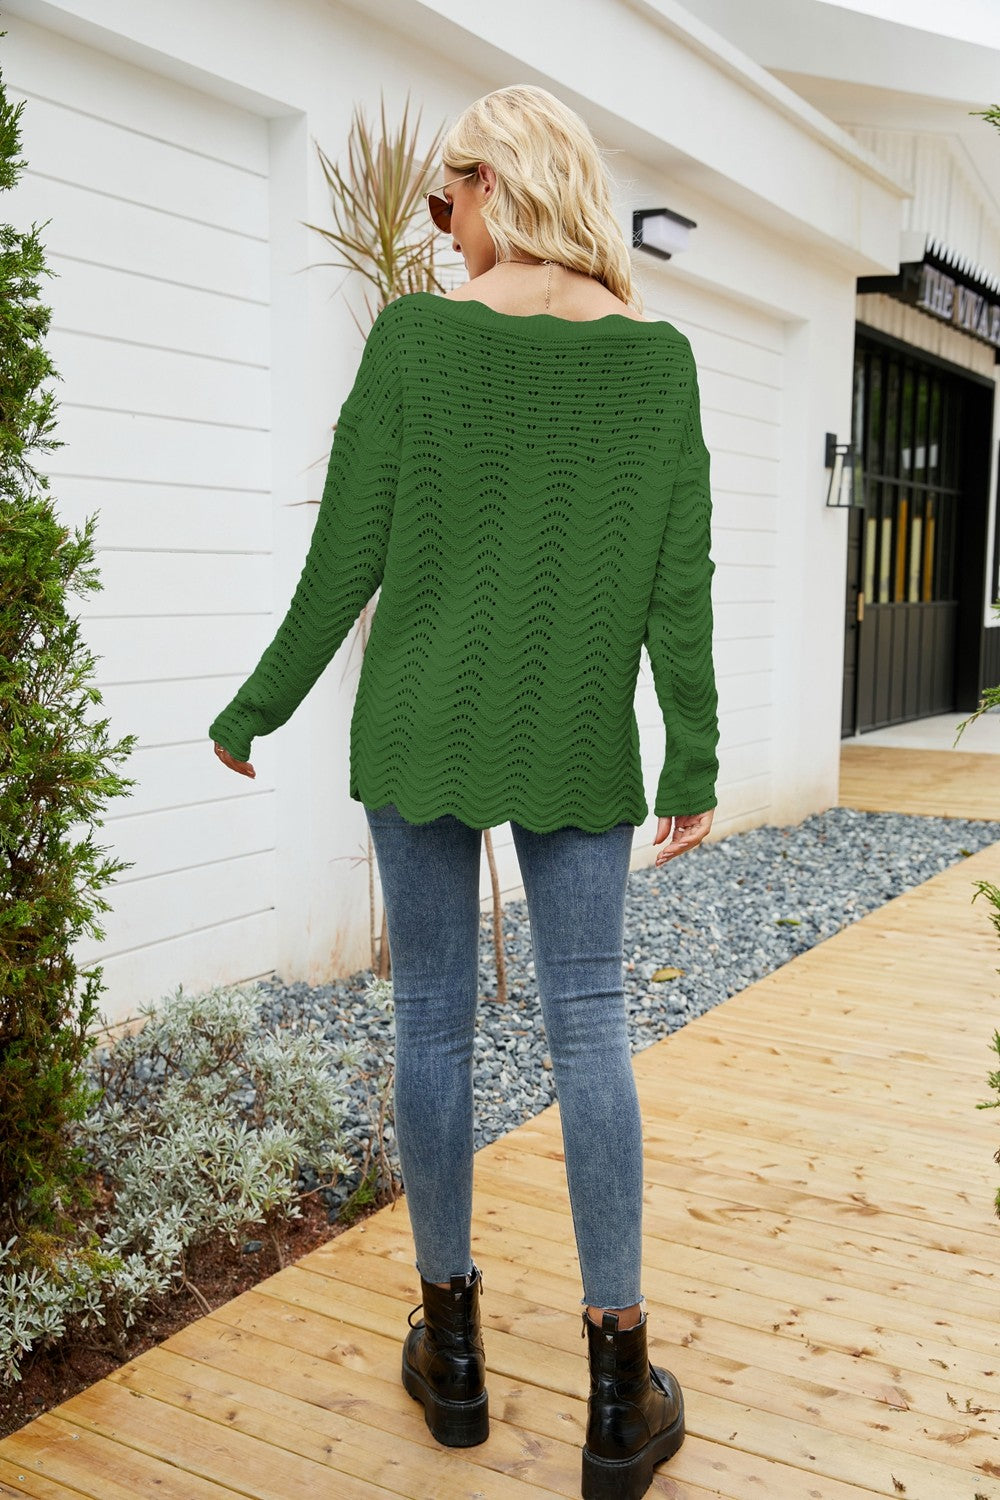 Scalloped Boat Neck Openwork Tunic Sweater - Pullover Sweaters - FITGGINS